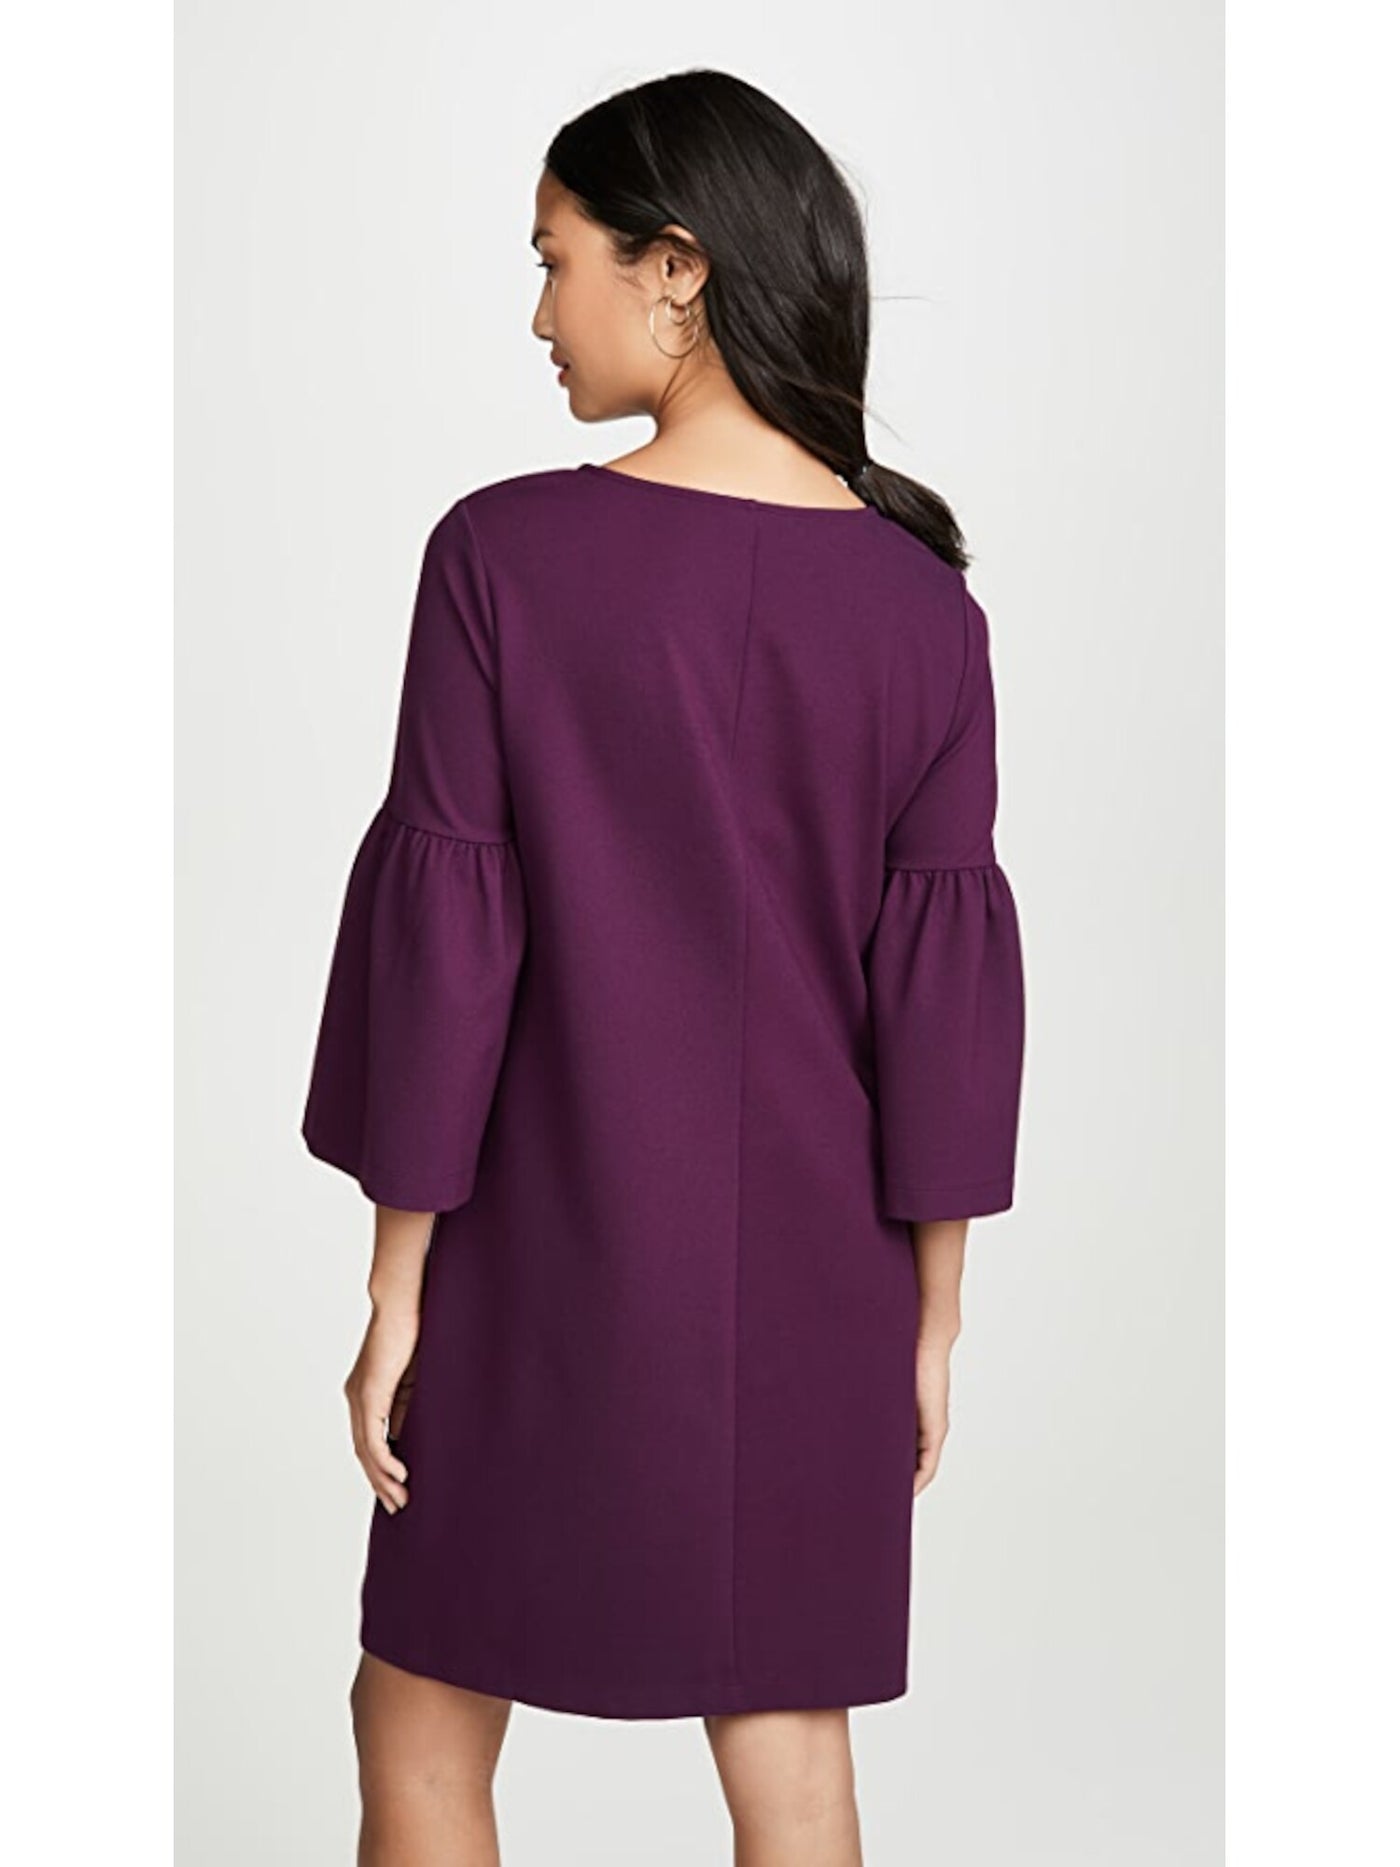 INGRID & ISABEL Womens Purple Knit Darted Bell Sleeve Jewel Neck Above The Knee Shift Dress Maternity M